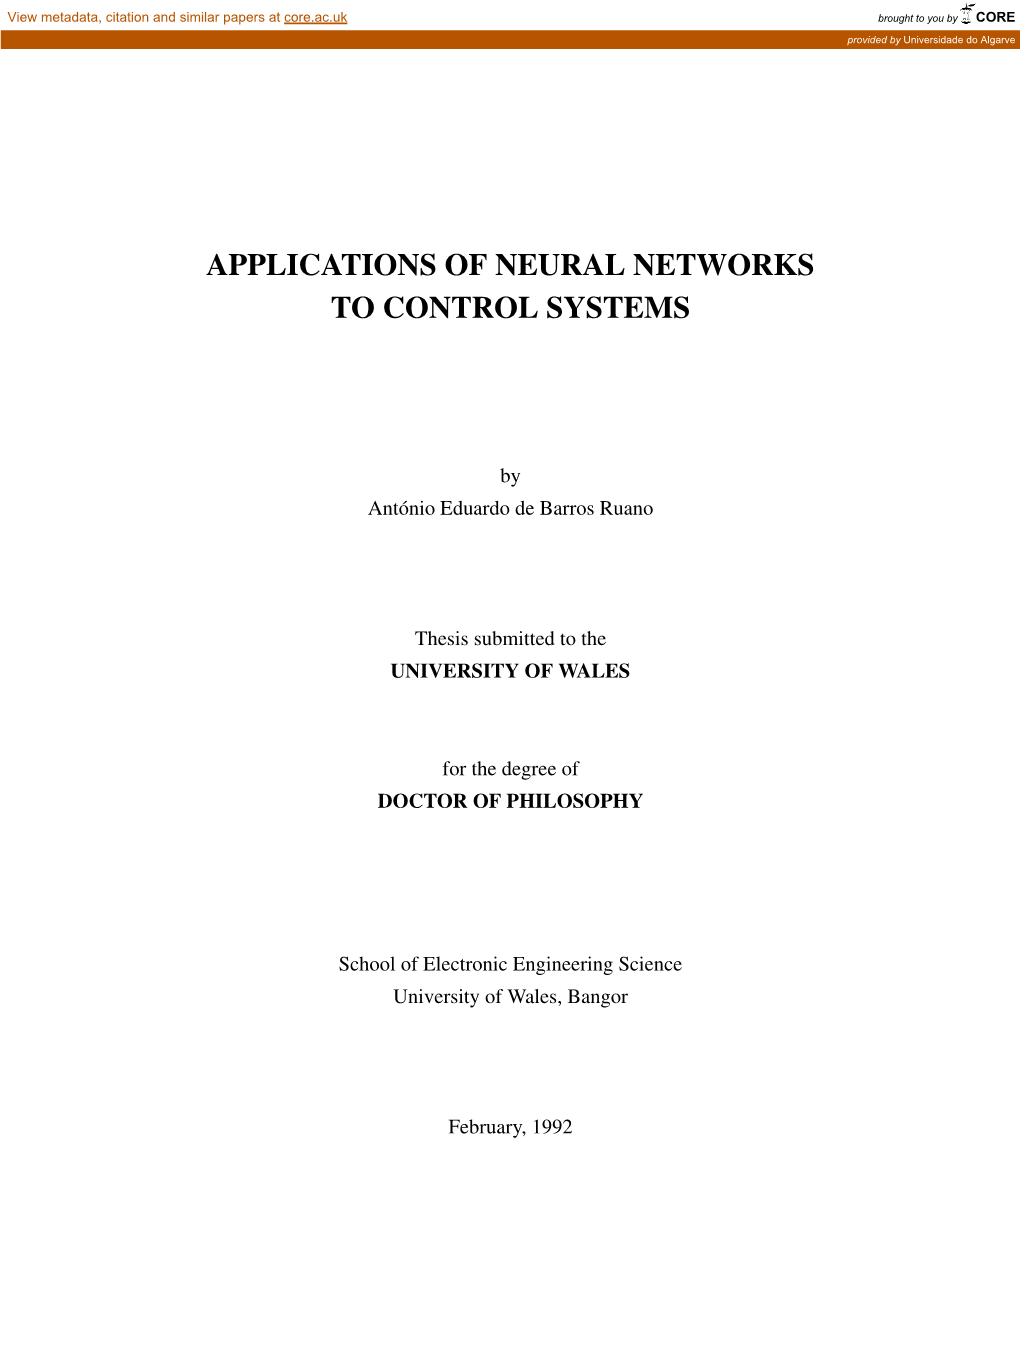 Applications of Neural Networks to Control Systems